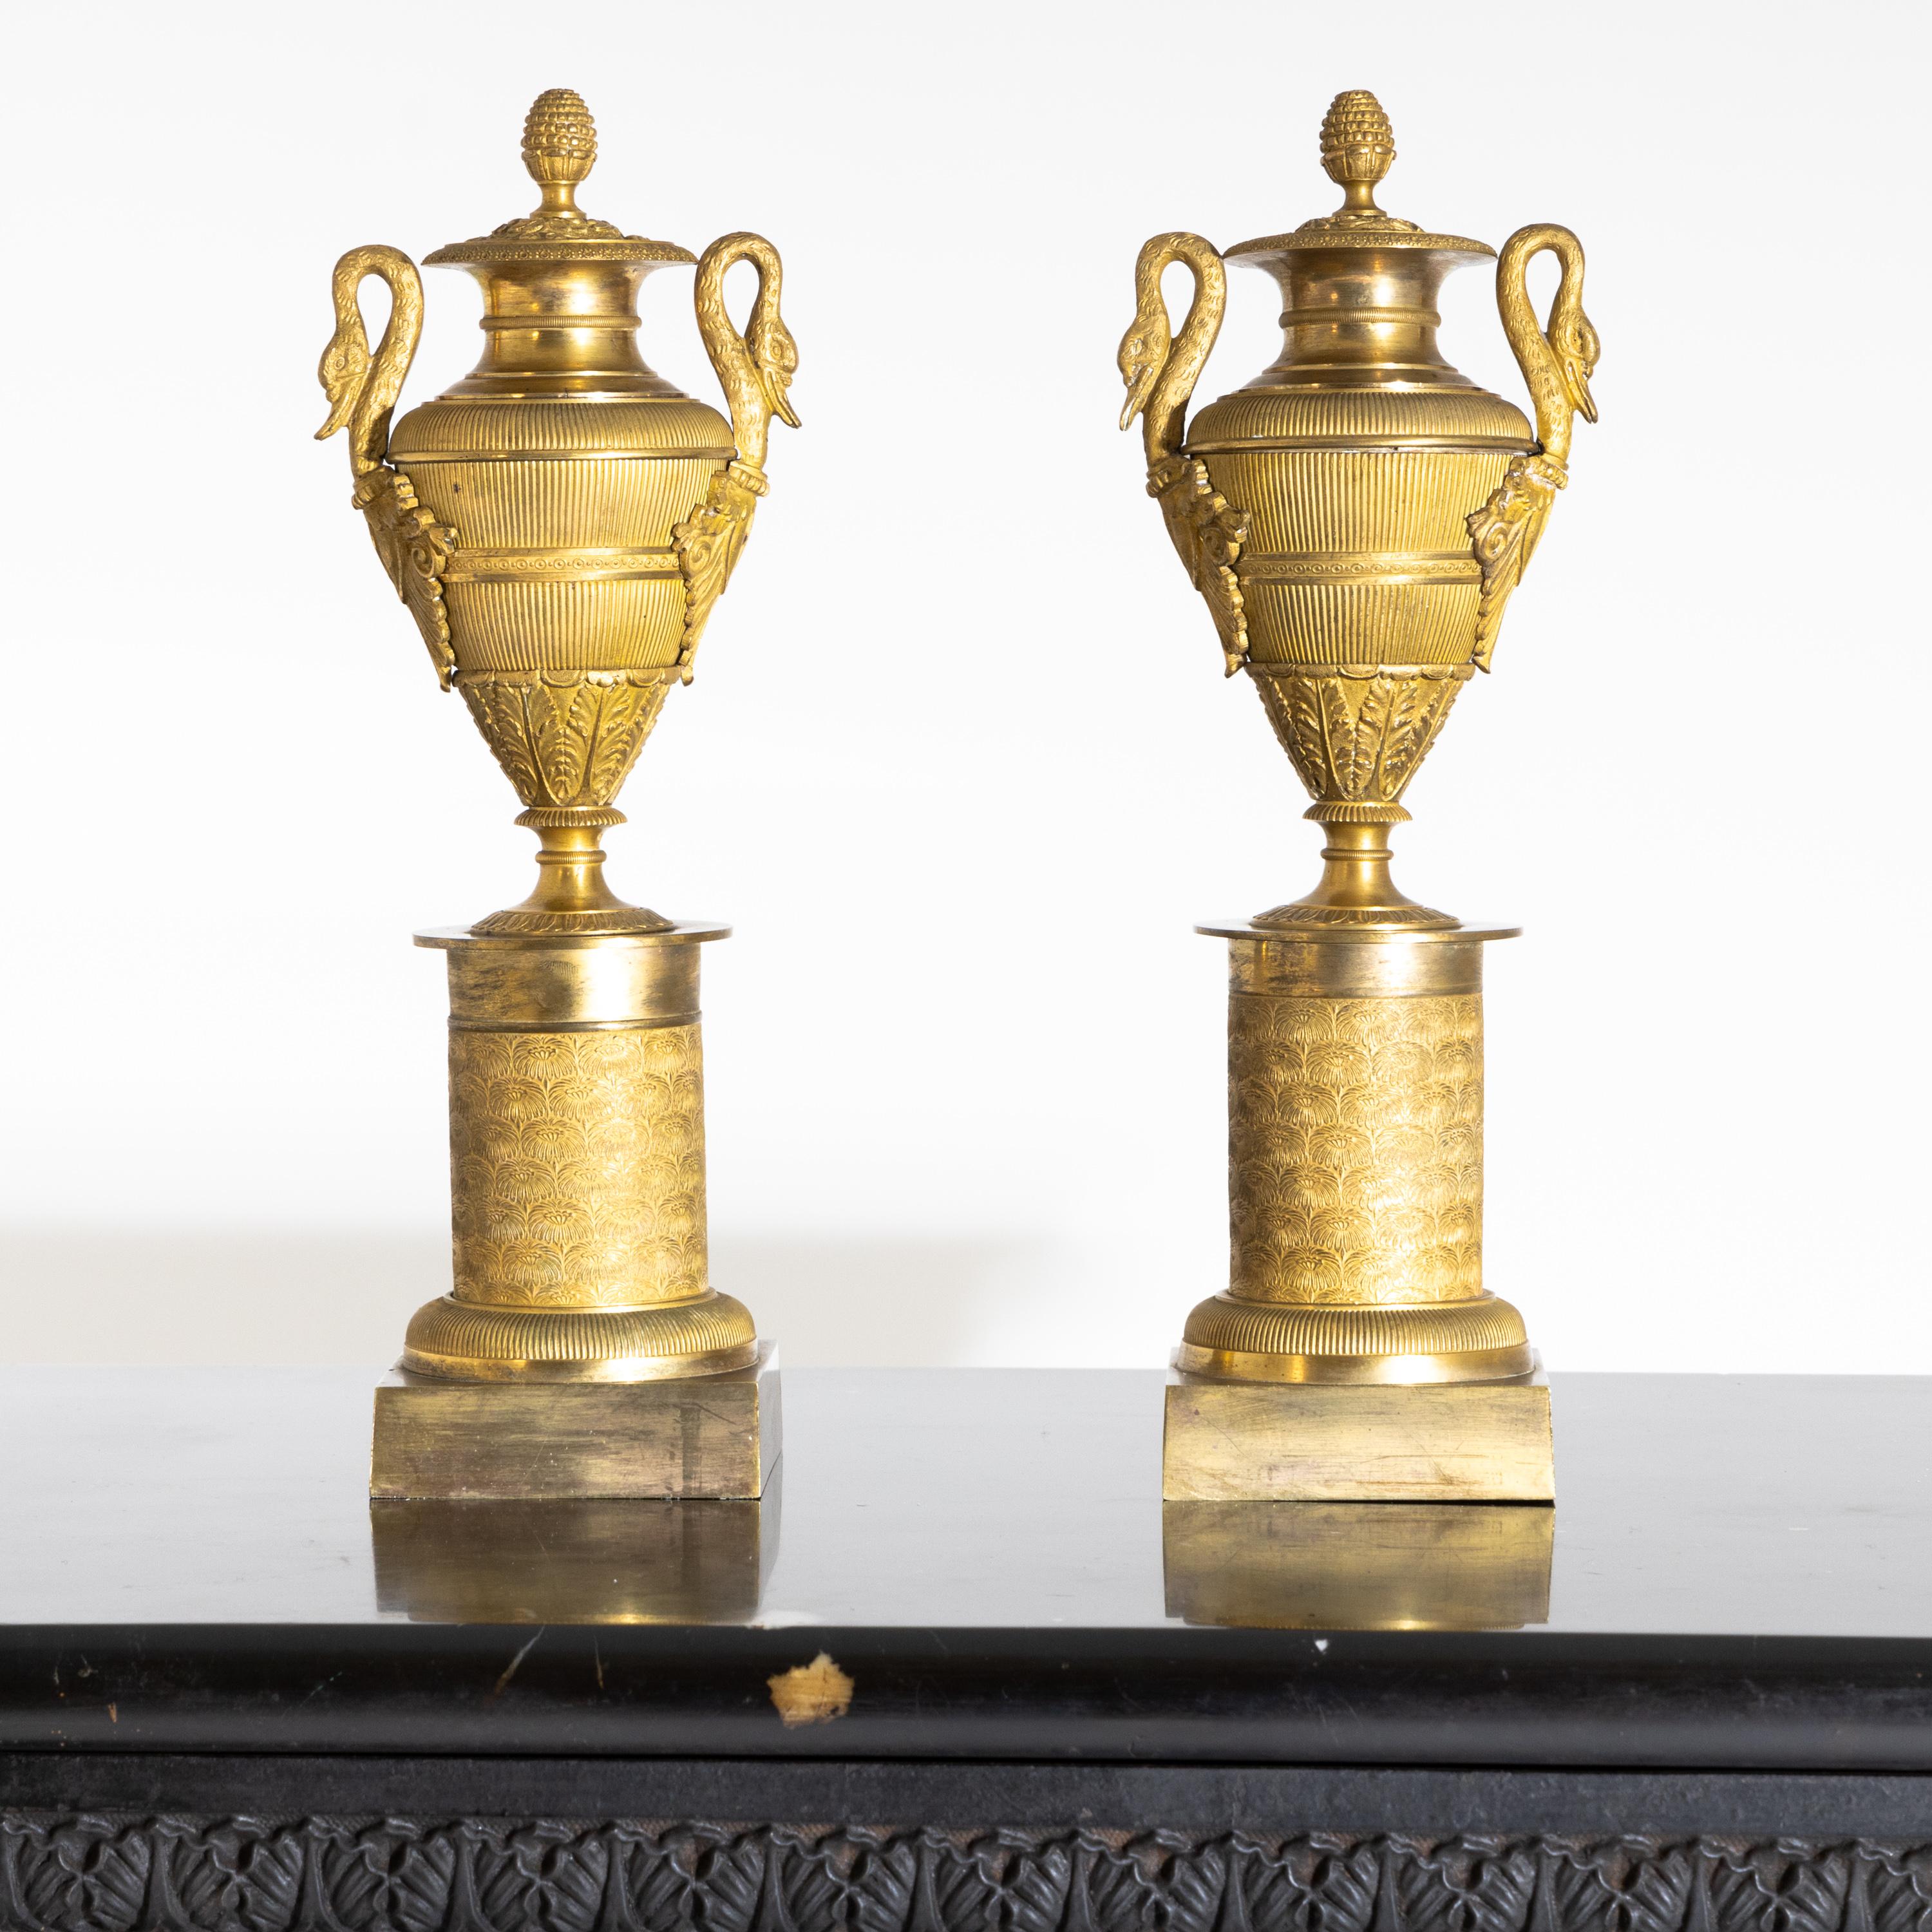 Pair of Empire cassolettes in urn form with swan neck handles on cylindrical bases. Fire-gilt bronze.